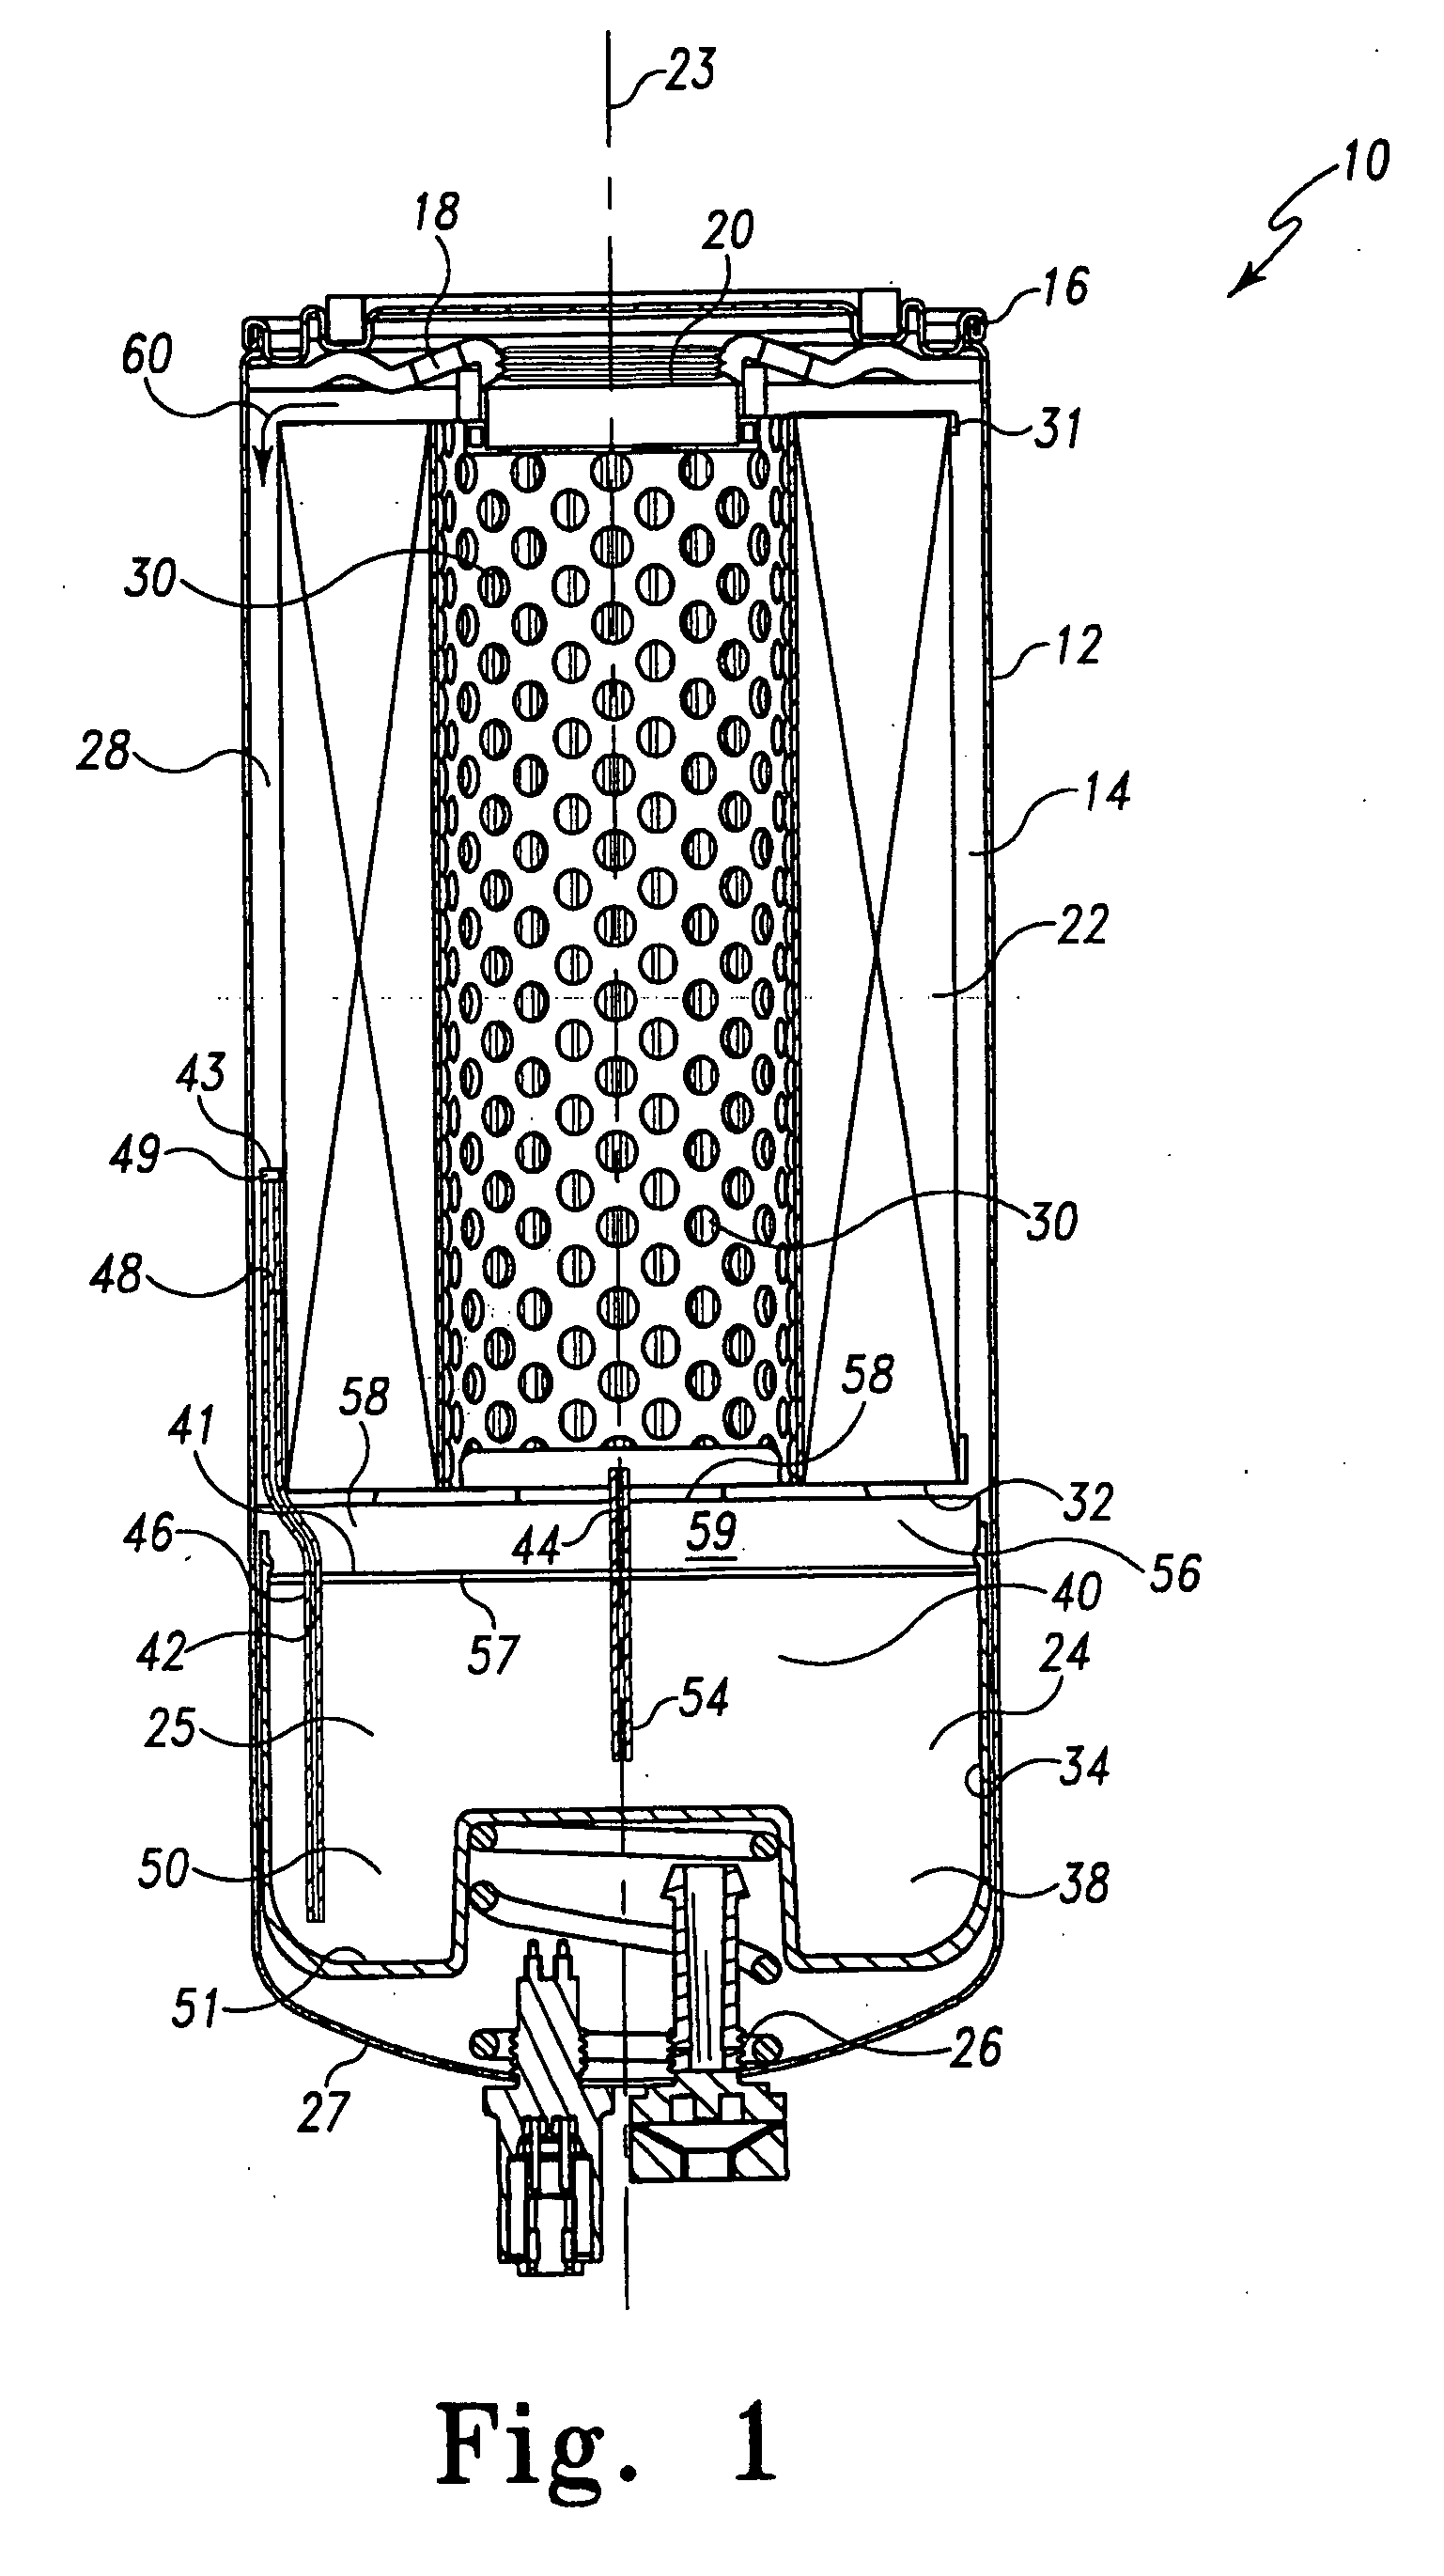 Pressure gradient dosing system for fluid supply